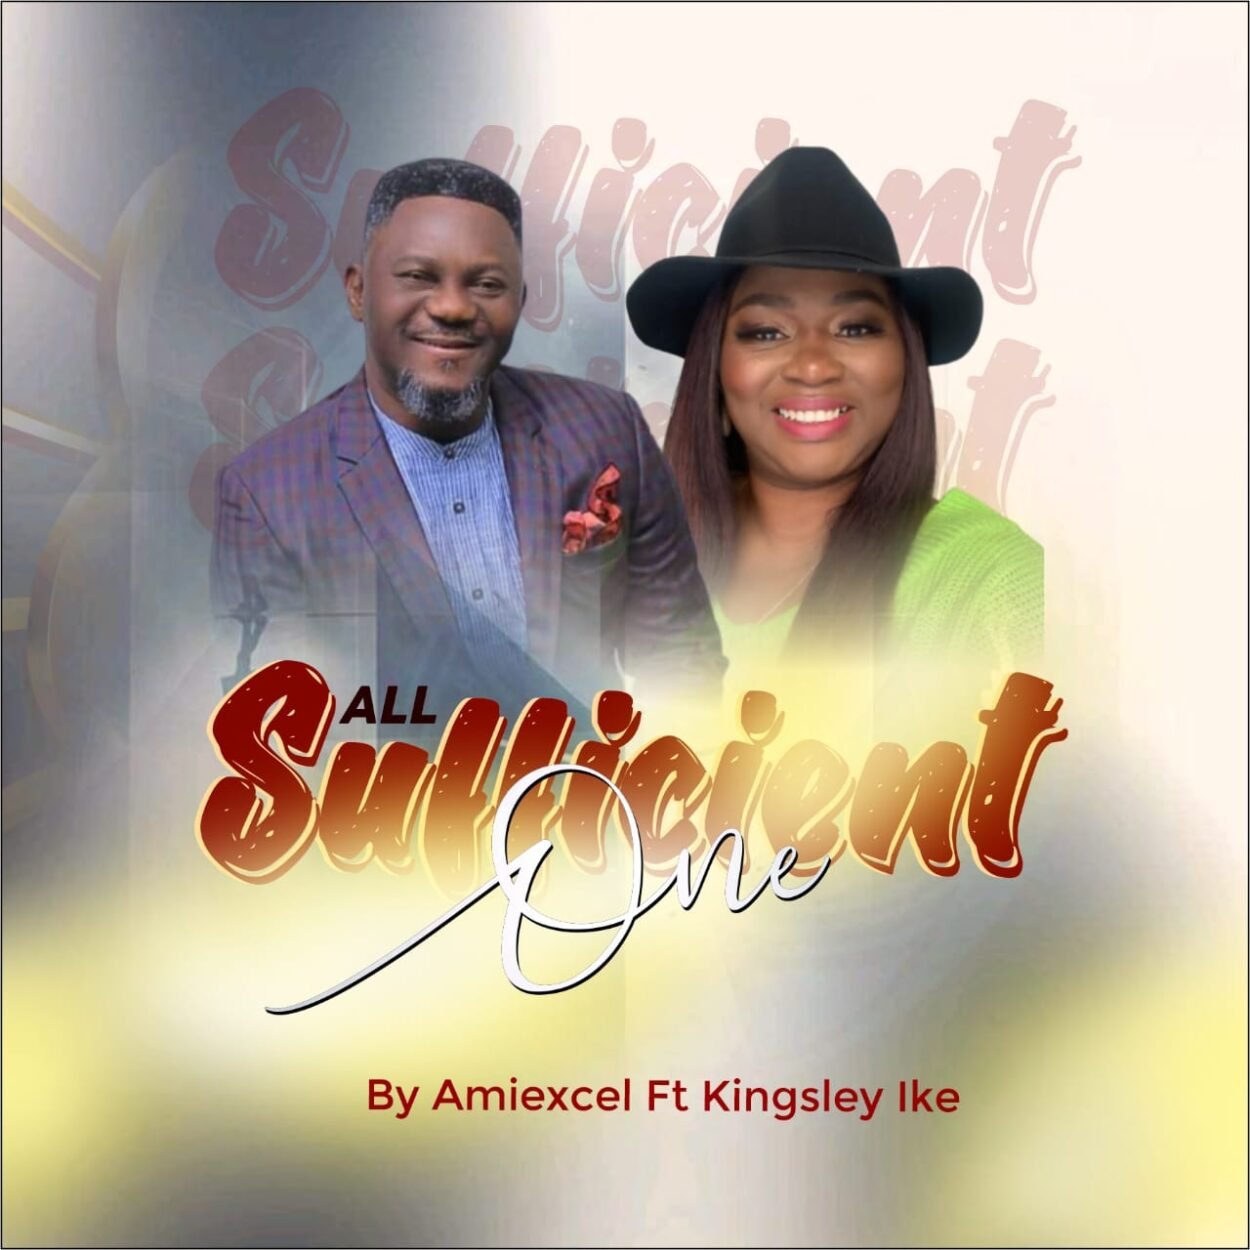 Amiexcel Ft. Kingsley - All Sufficient God 